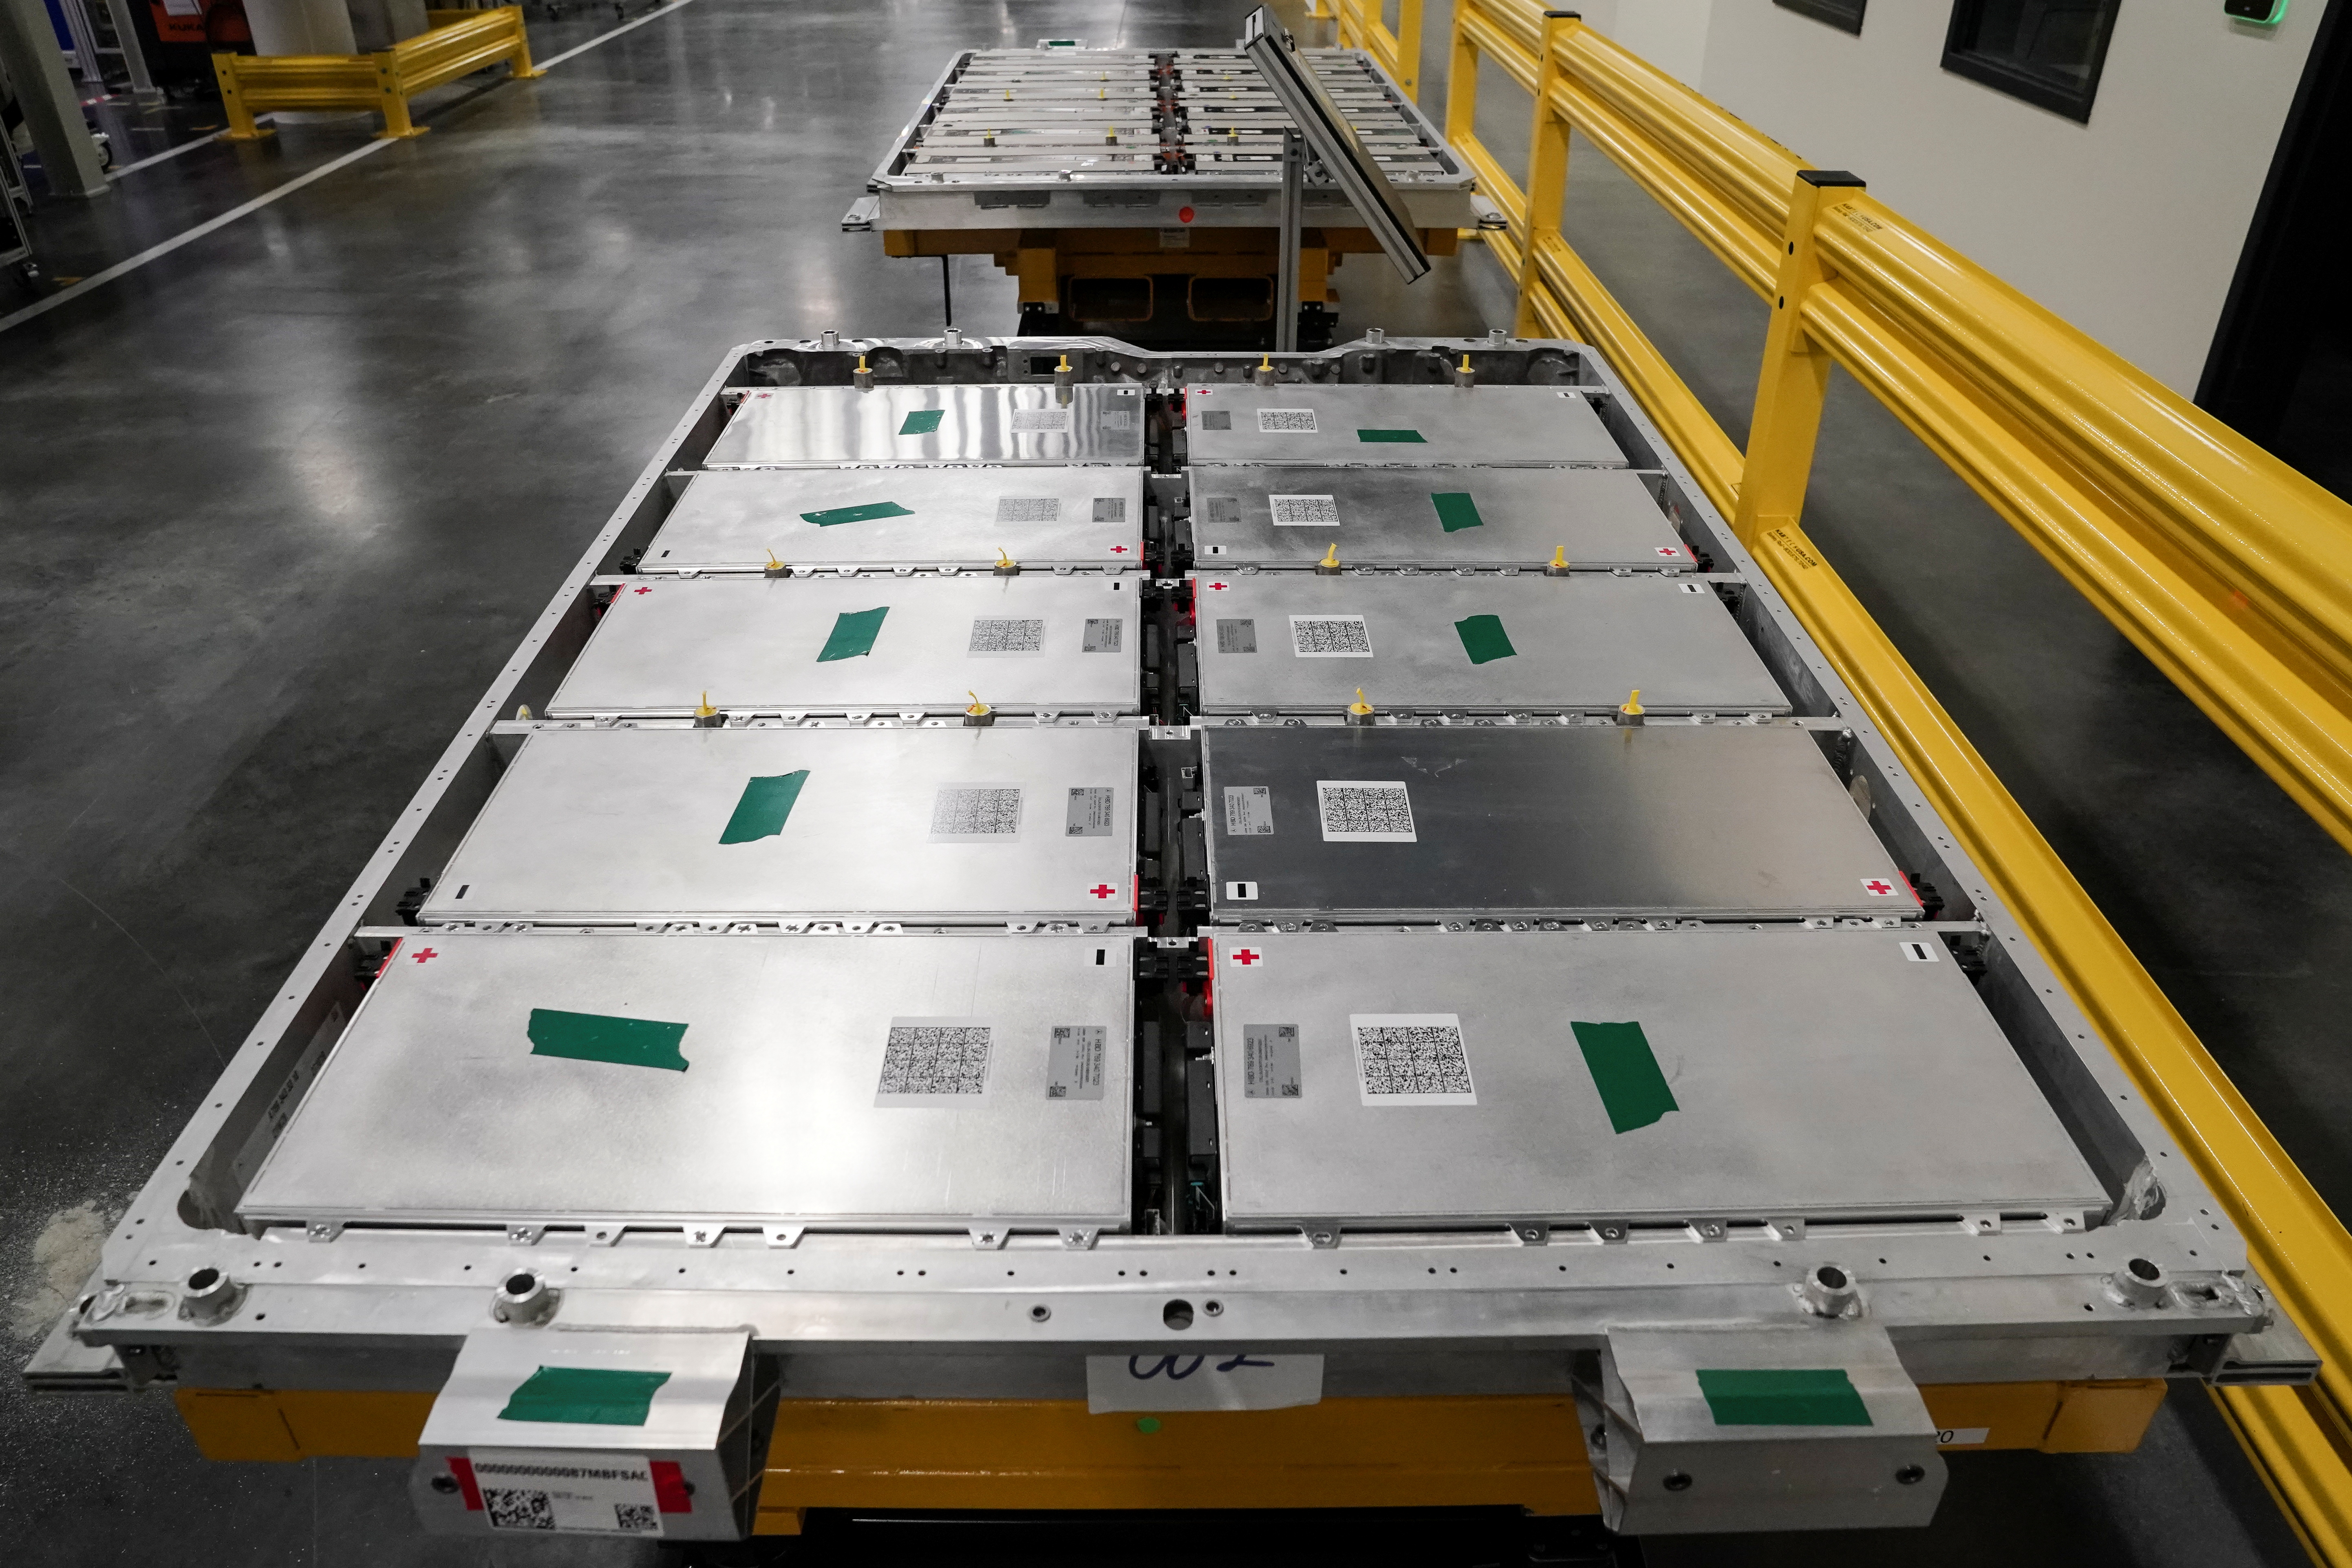 The electric vehicle battery tray assembly line is seen at the opening of the Battery Factory for the Mercedes-Benz plant in Alabama